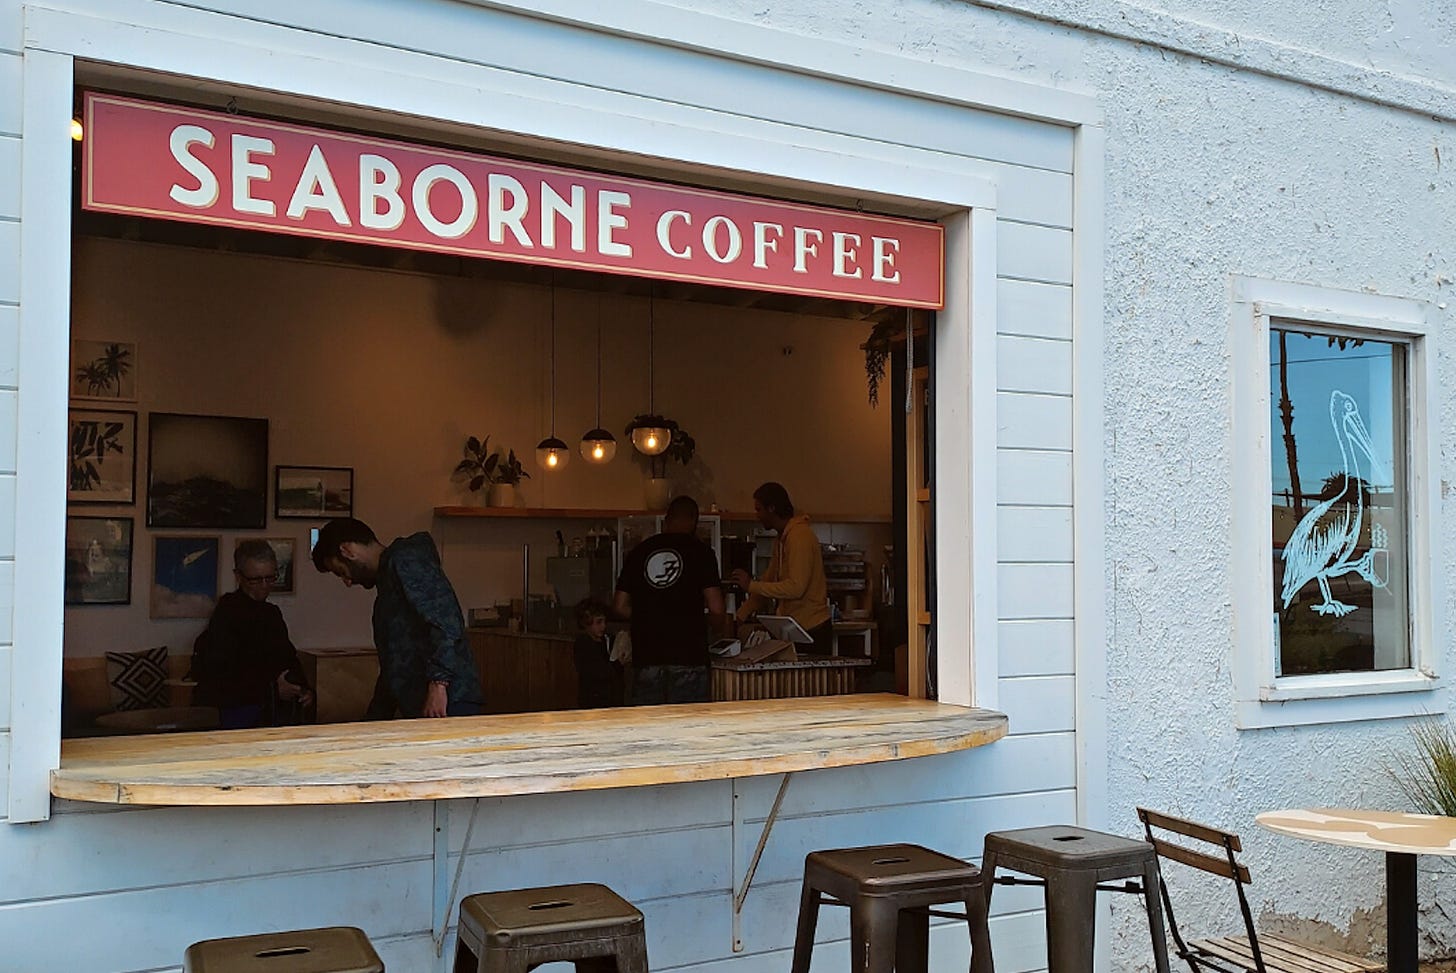 A walk up counter at a coffee shop. Stools outside the white wood and stucco building are set up for customers and an orange sign with white lettering says, "Seaborne Coffee."